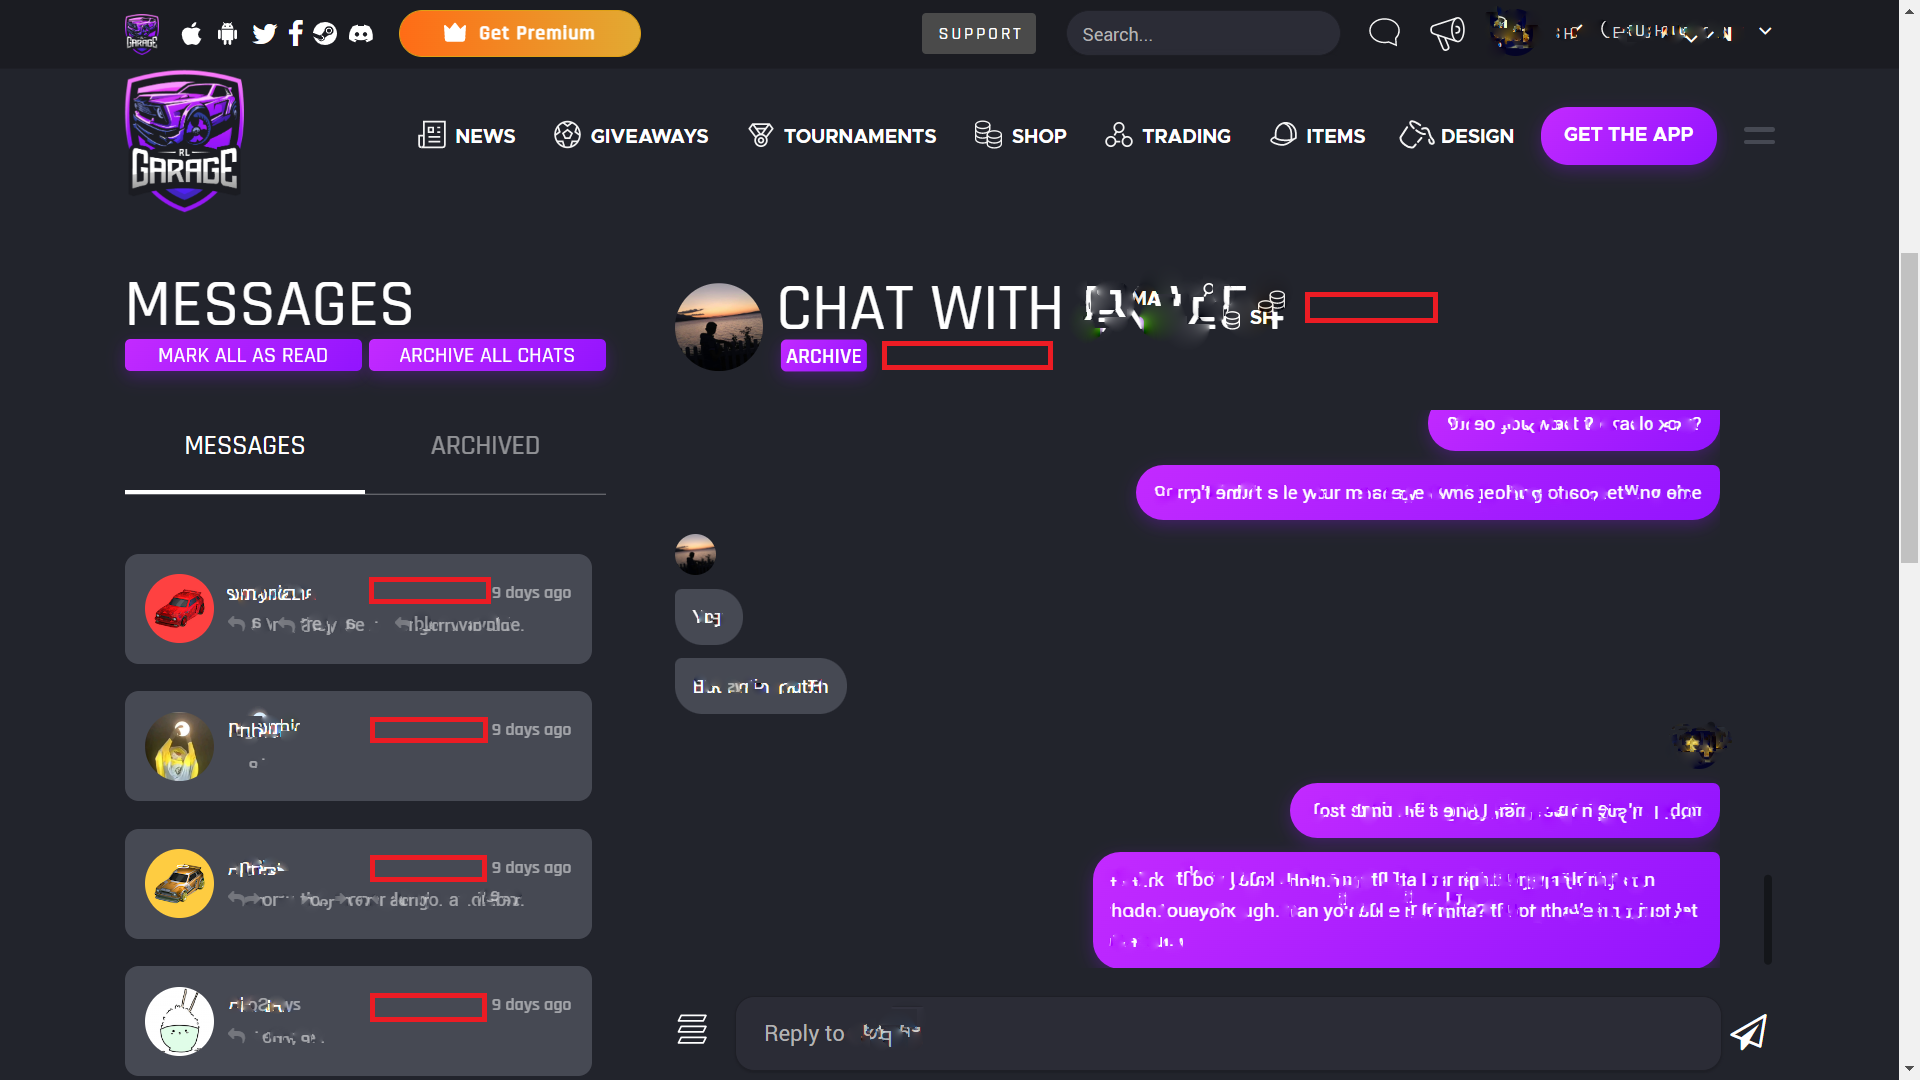 Show the "last seen" feature in chat section